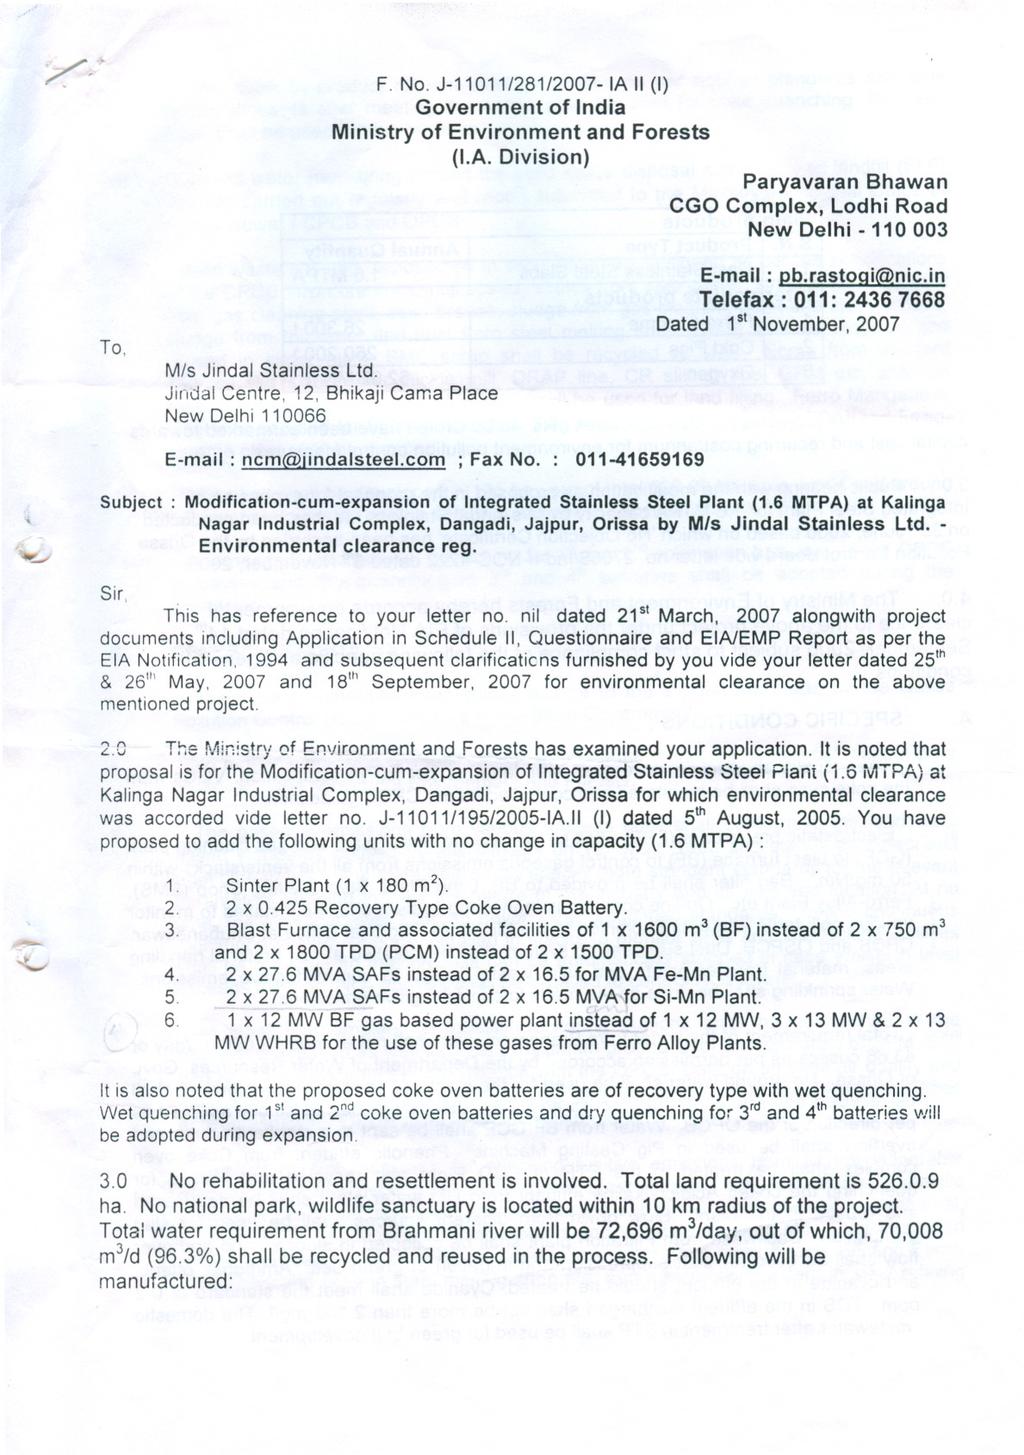 F. No. J-11011/281/2007- IA \I (I) Government of India Ministry of Environment and Forests (I.A. Division) Paryavaran Bhawan CGO Complex, Lodhi Road New Delhi - 110 003 To, Mis Jindal Stainless Ltd.